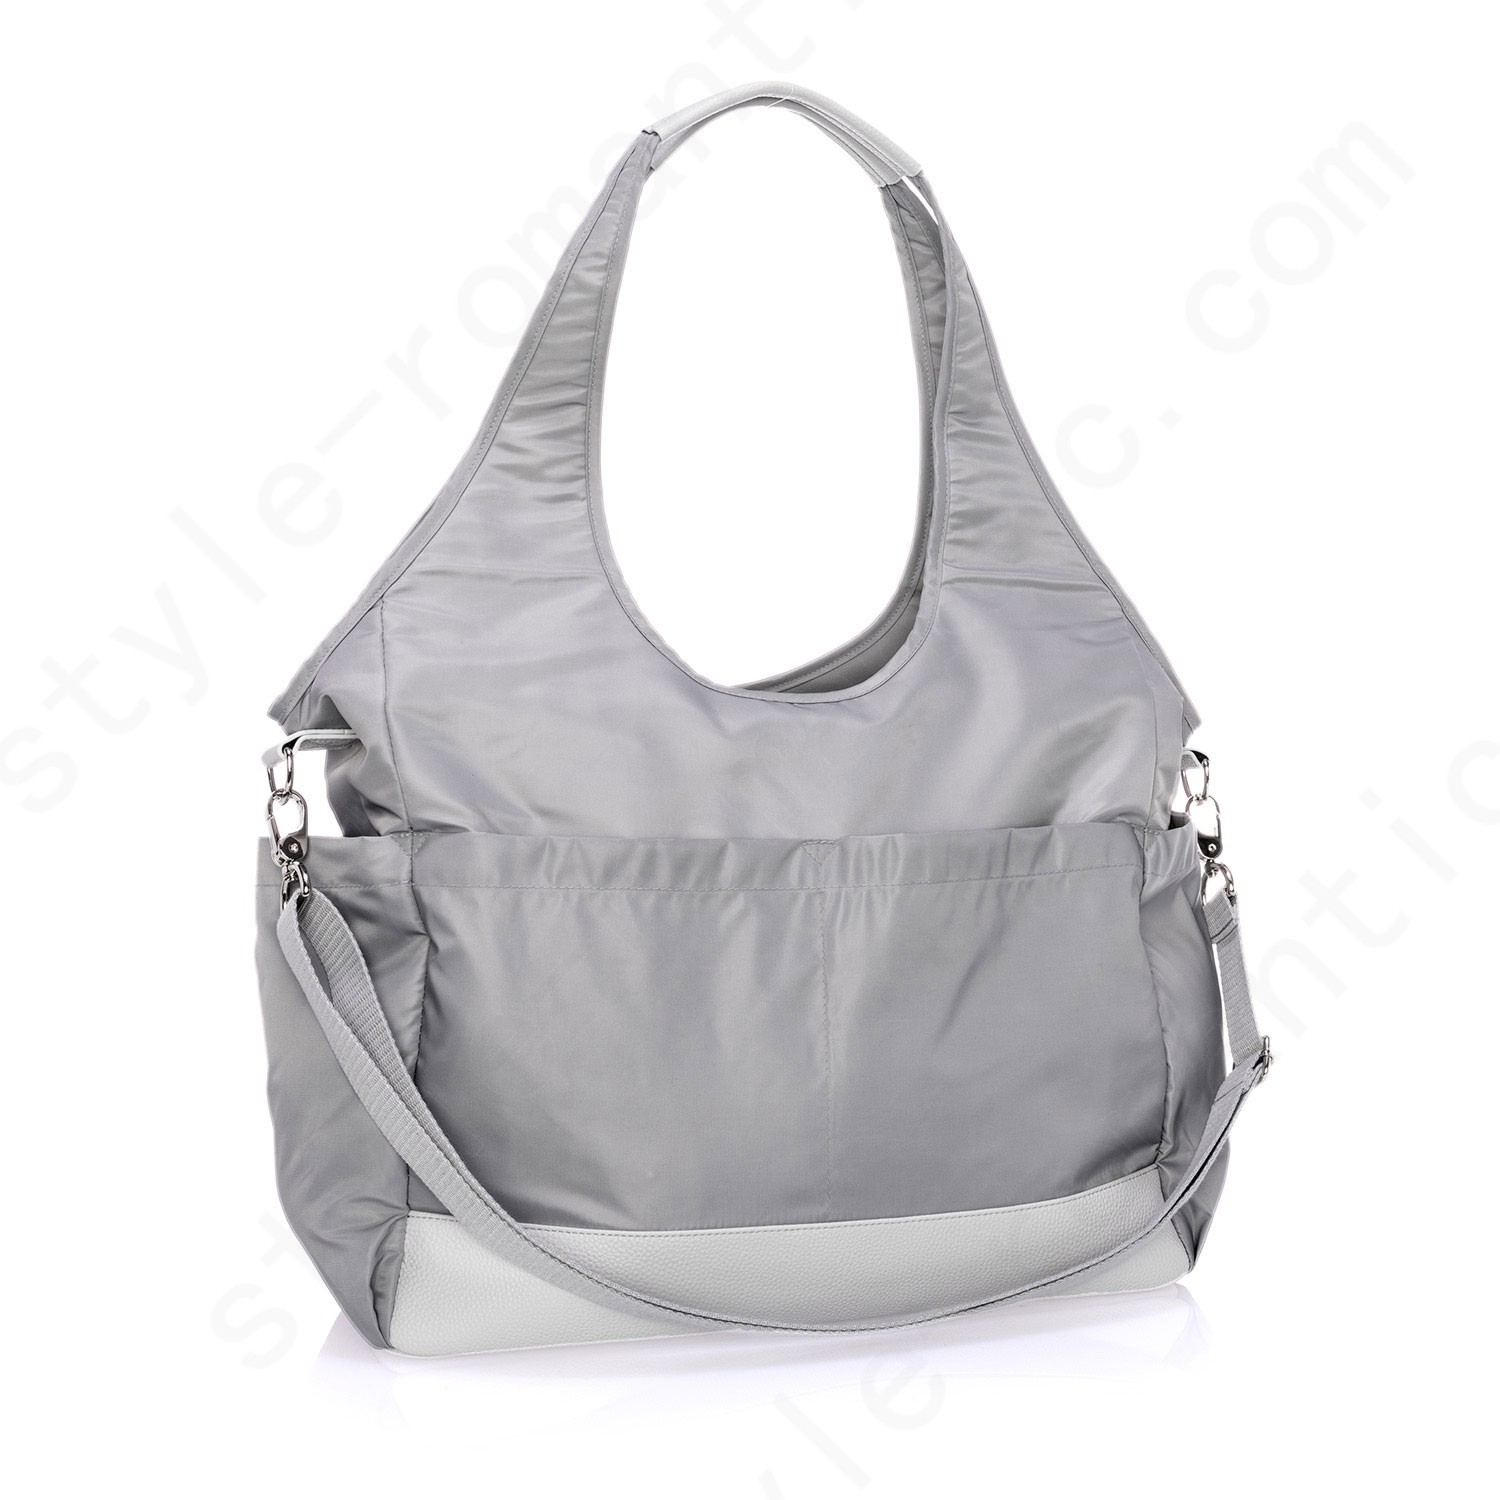 Thirty-One Gifts City Park Bags - Whisper Grey - Thirty-One Gifts City Park Bags - Whisper Grey